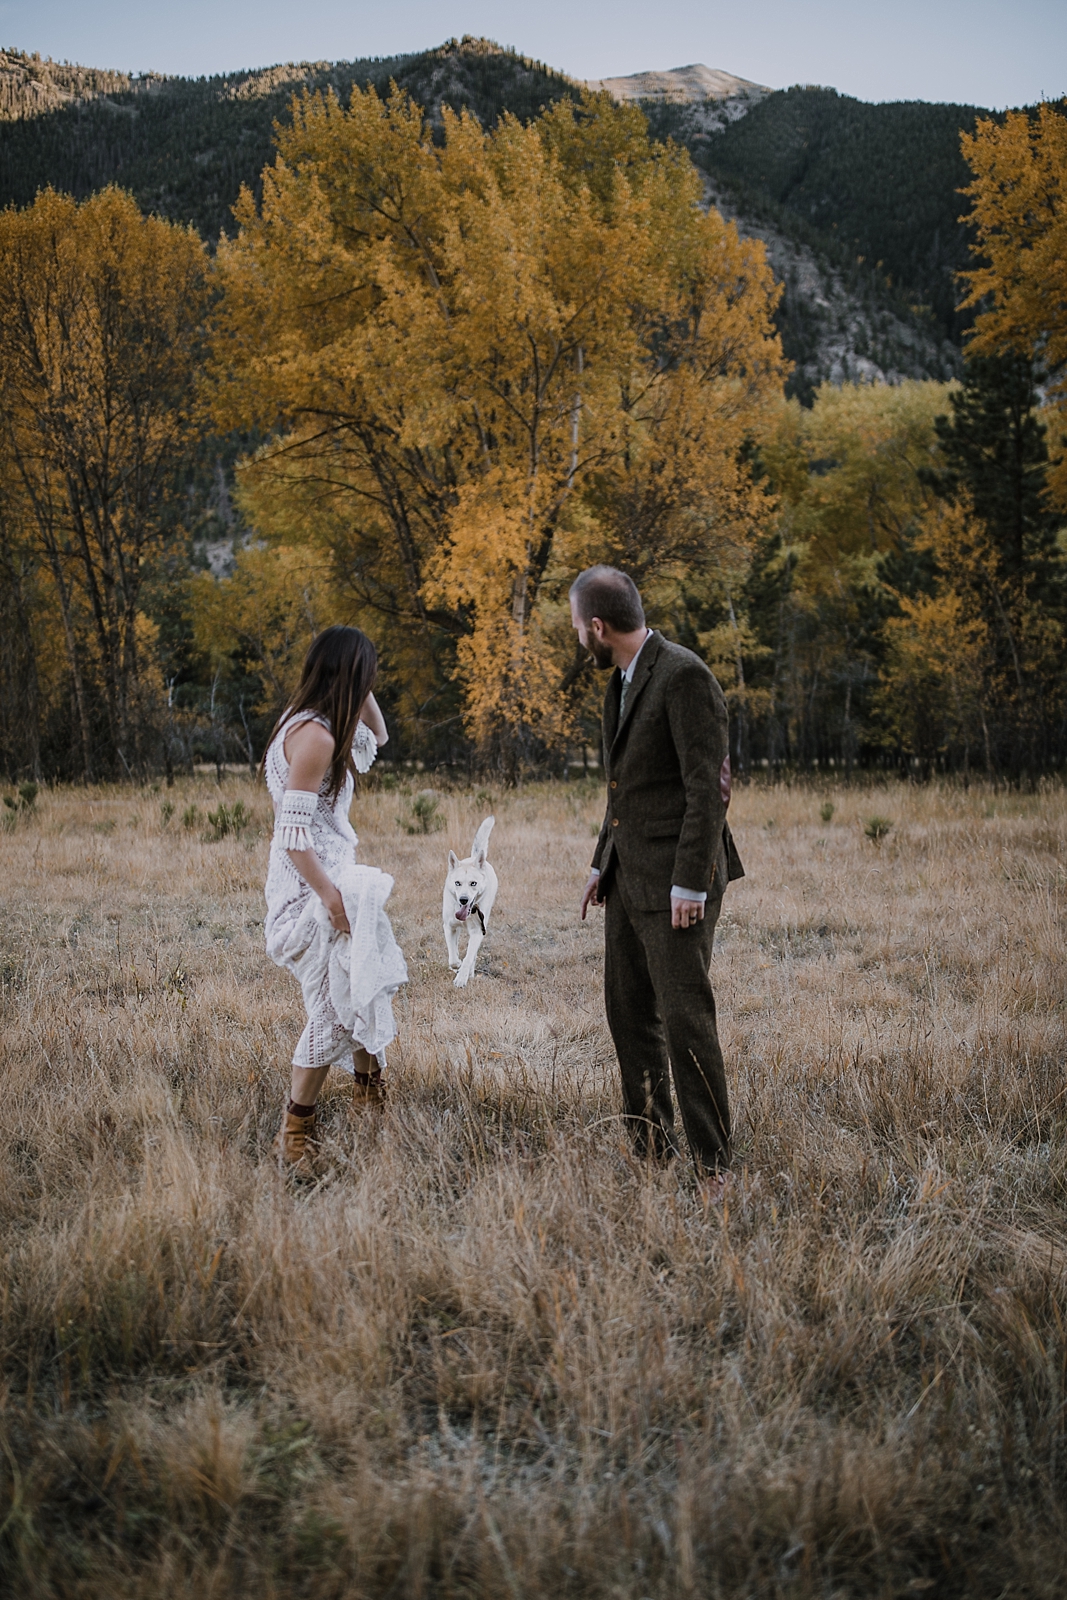 blue eyed husky, couple hiking, norway elopement, post elopement celebration, wedding in the woods, buena vista elopement, buena vista wedding, nathrop colorado wedding, elope with your dog